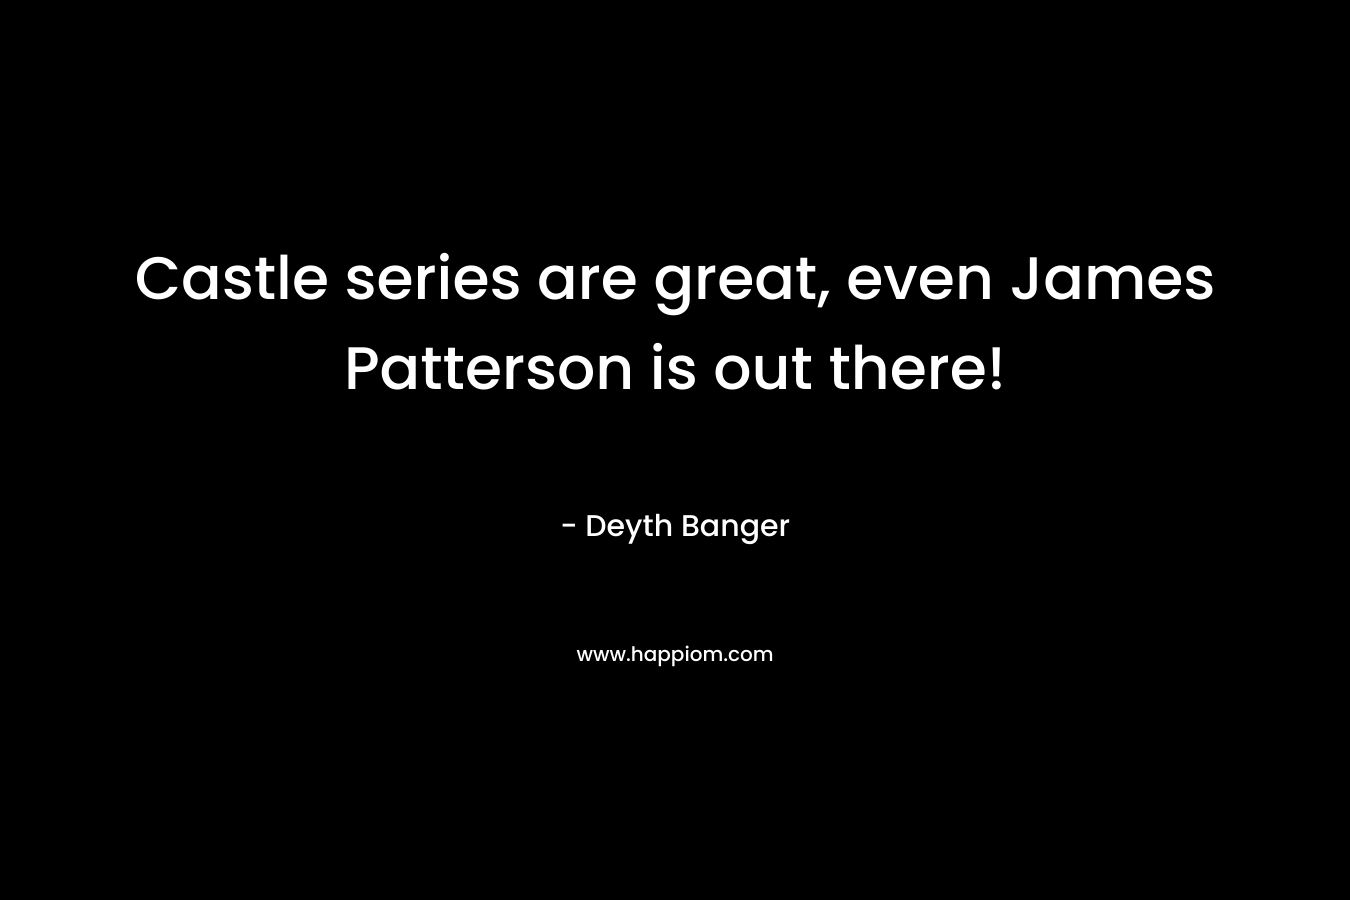 Castle series are great, even James Patterson is out there! – Deyth Banger